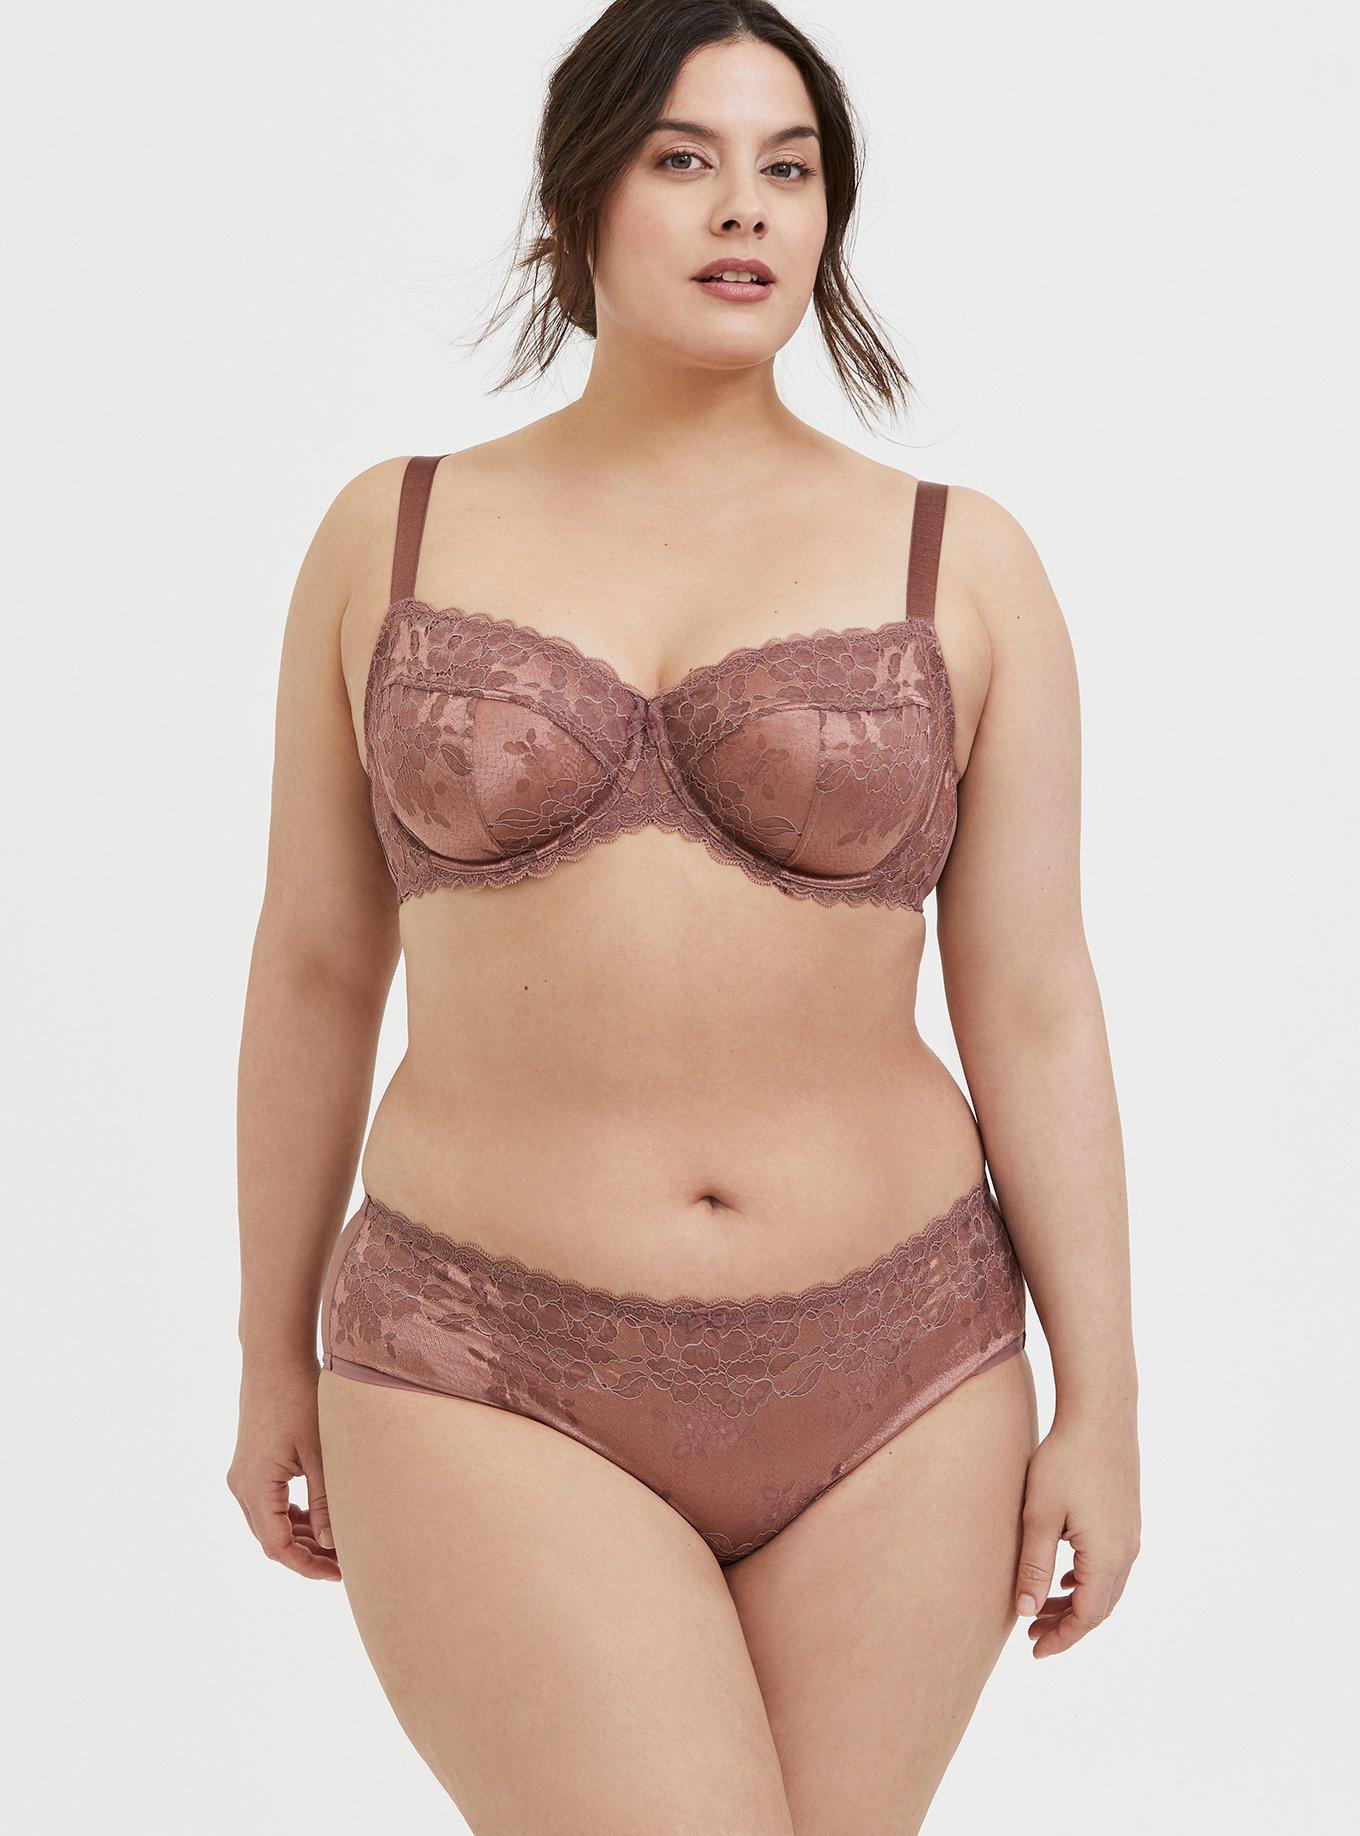 Plus Size - Full-Coverage Unlined Two Tone Lace Ballet Back Bra